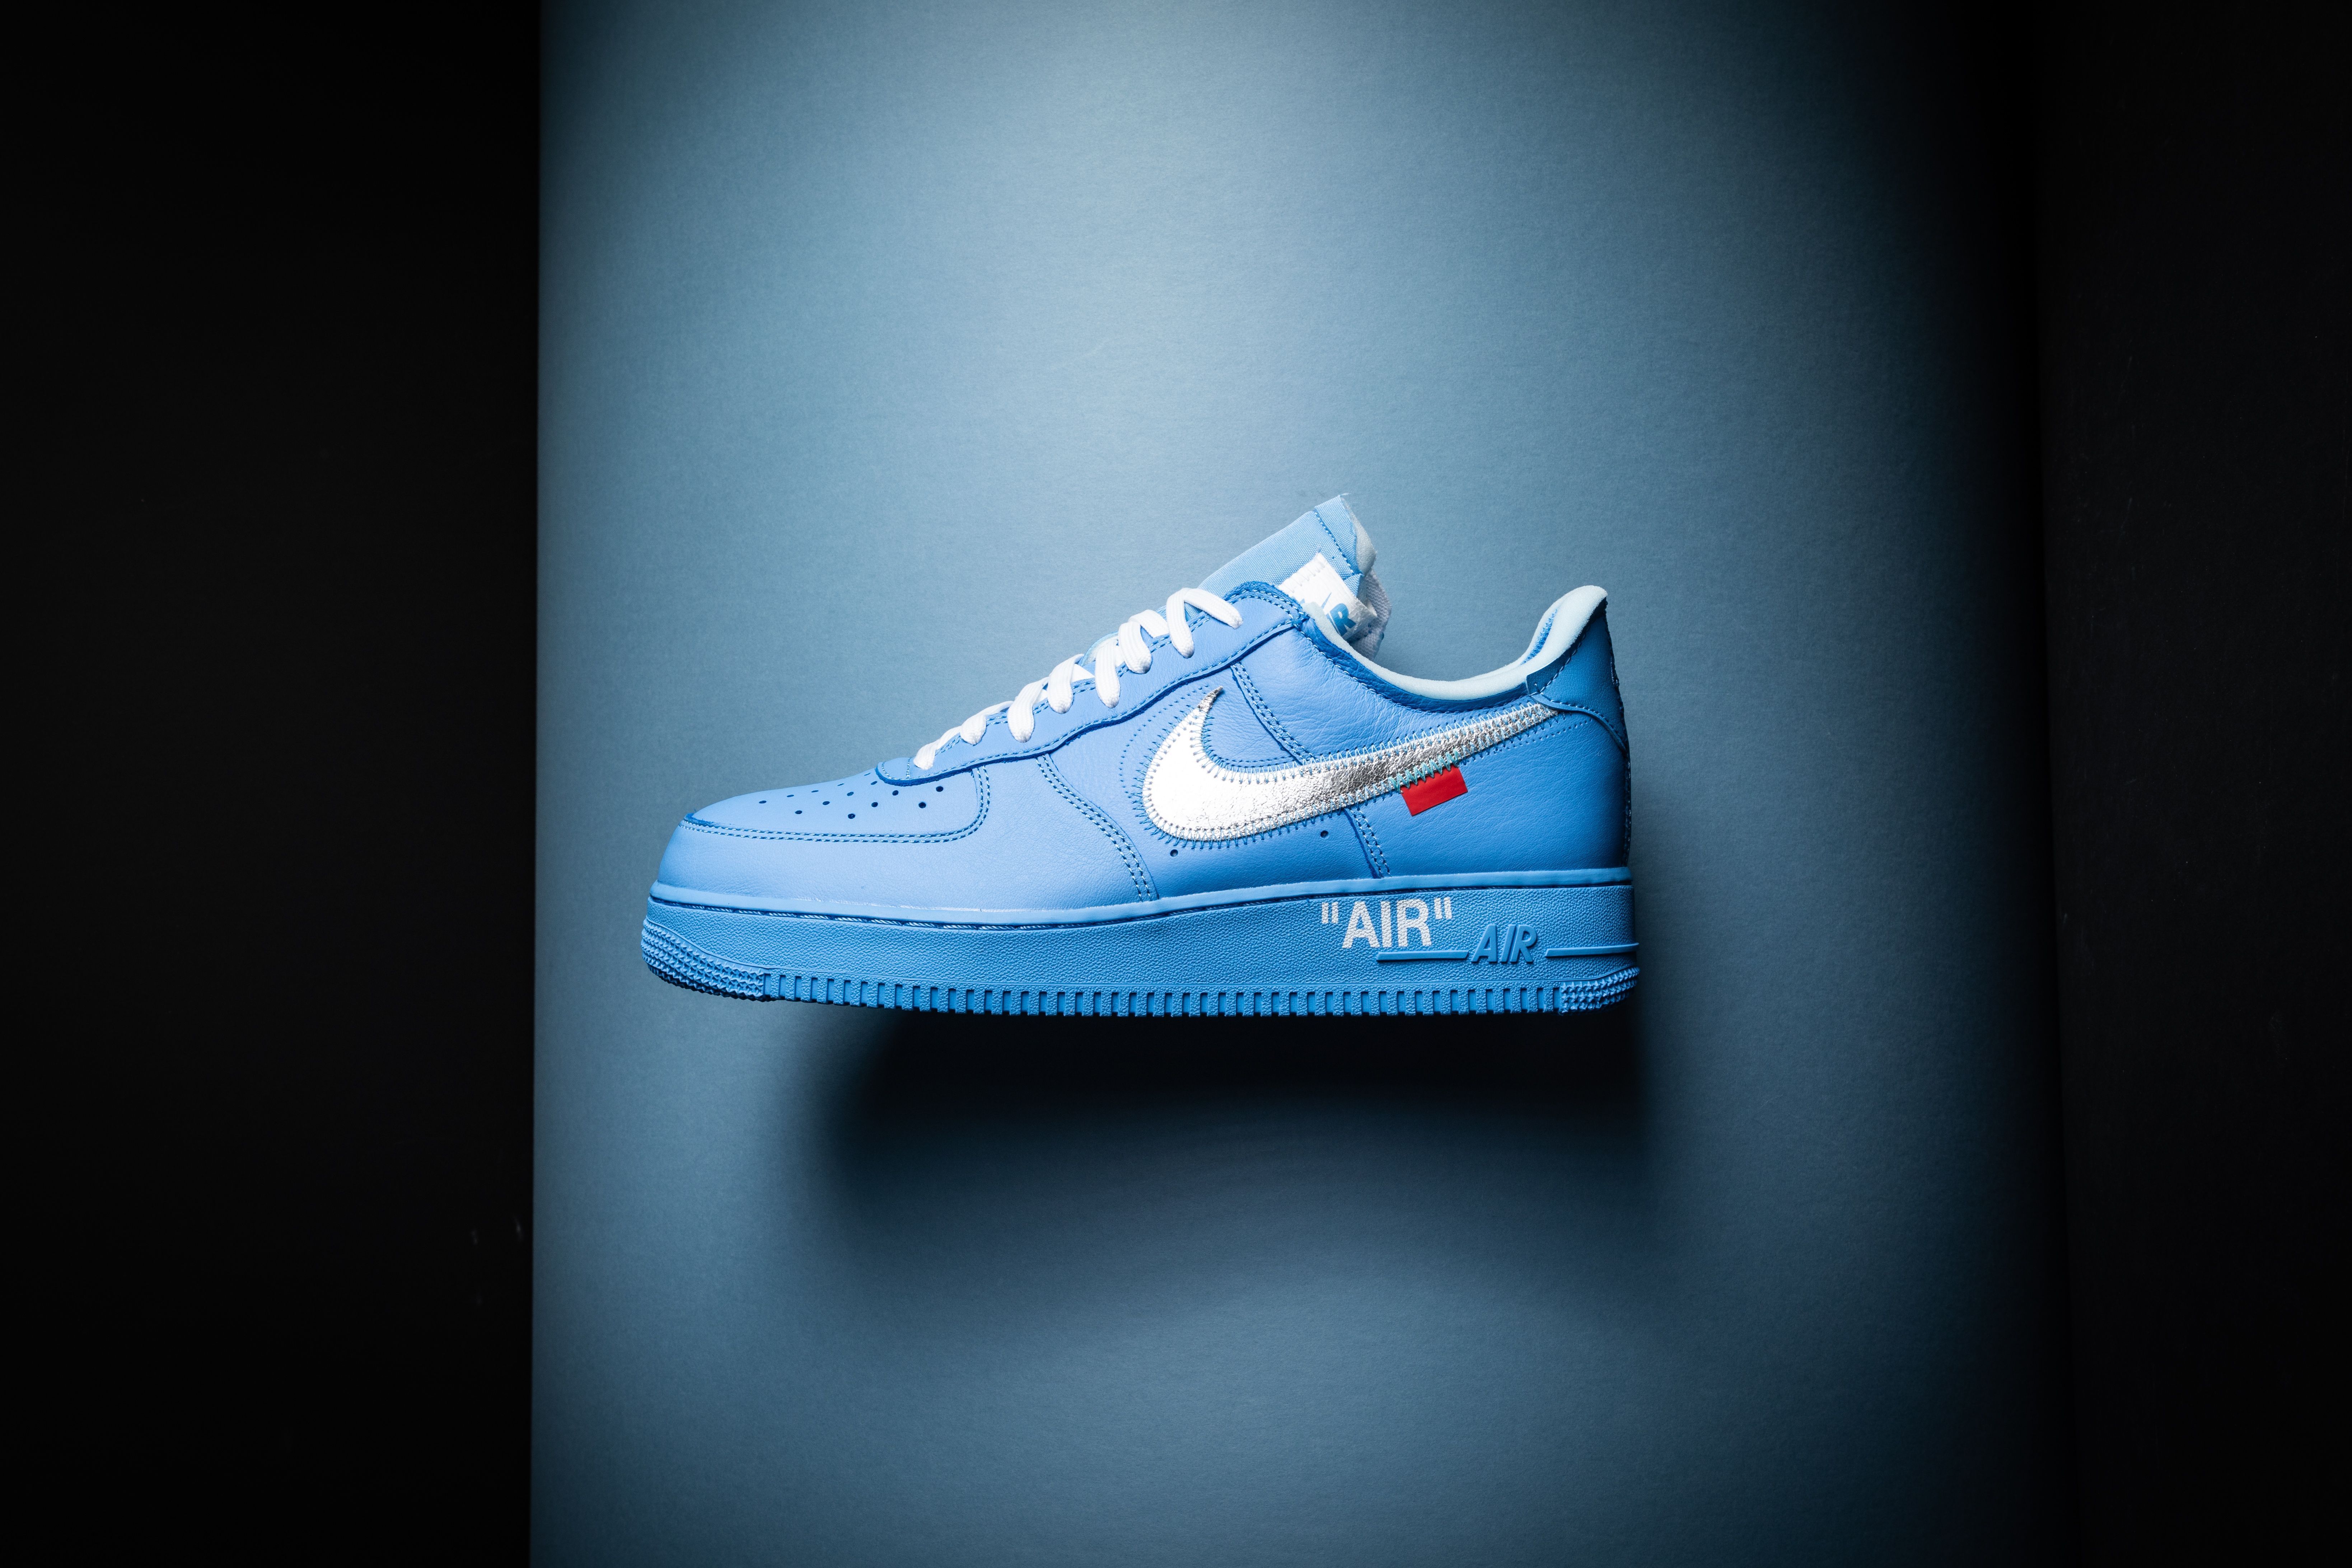 The Off White X Nike Air Force 1 Is Feeling Blue For Its Latest Release, This Extremely Limited “MCA” Edition. Thi. Sneakers Men Fashion, Nike, Nike Air Force Low